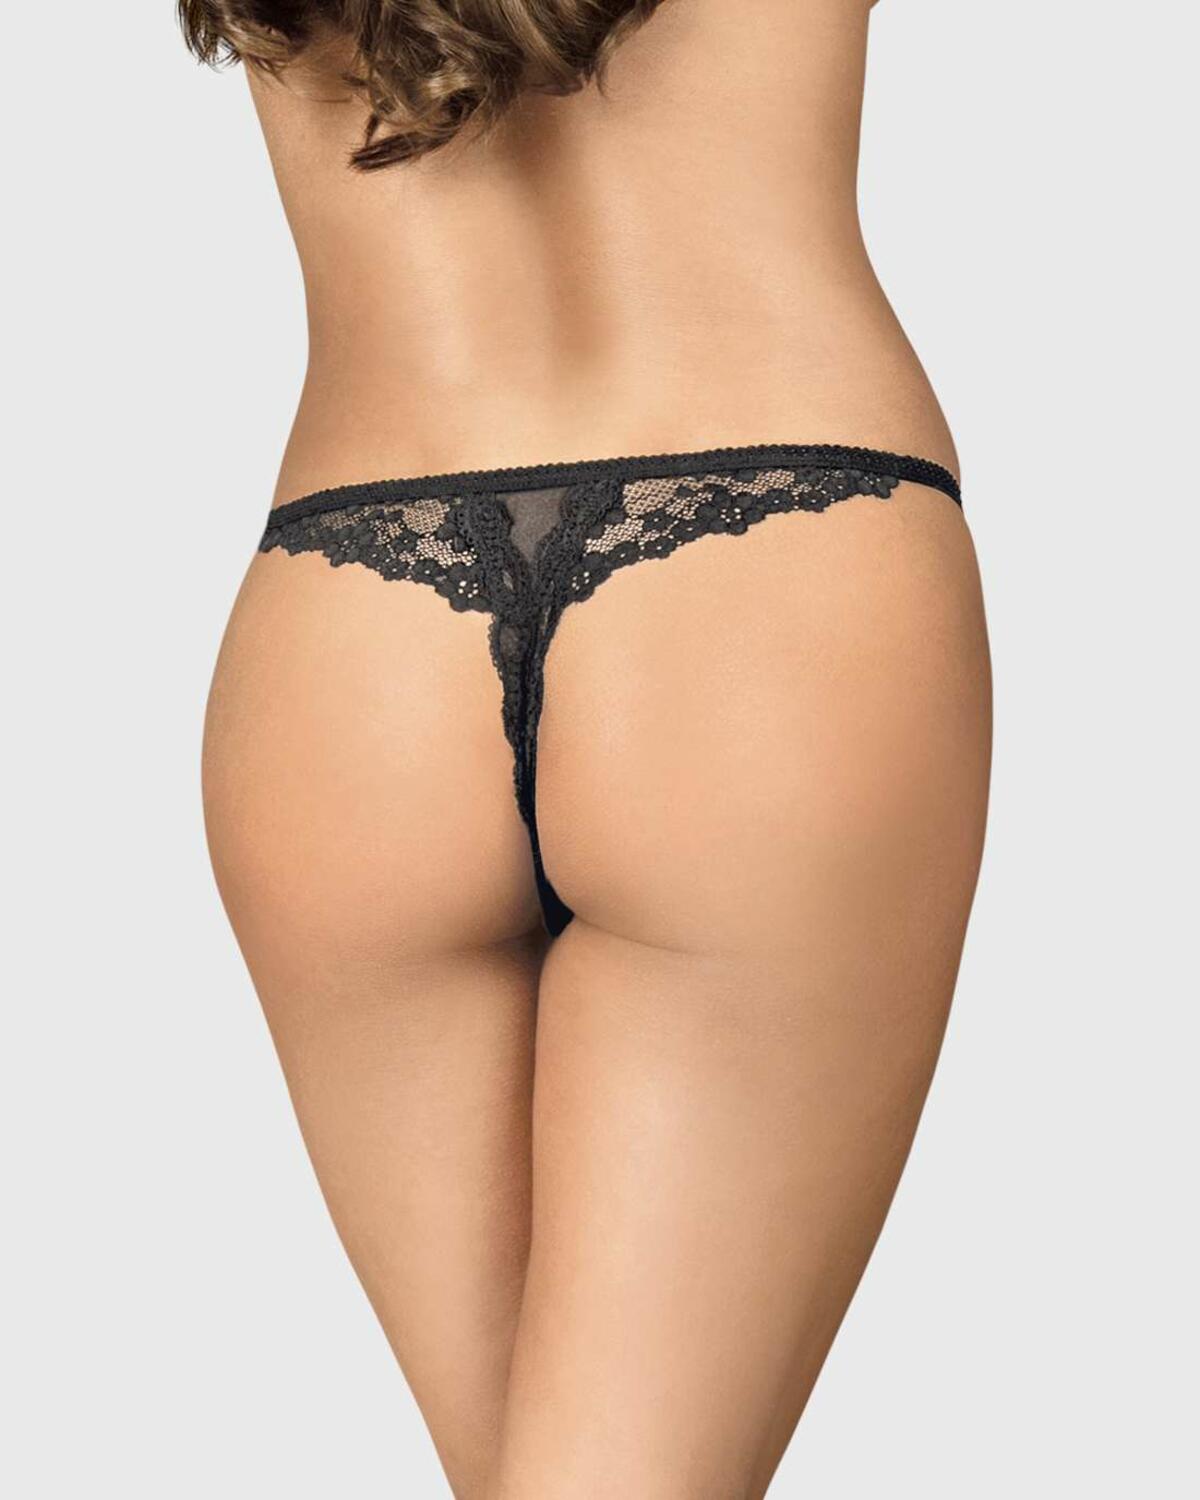 Lace Sexy Thong, Lace Underwear